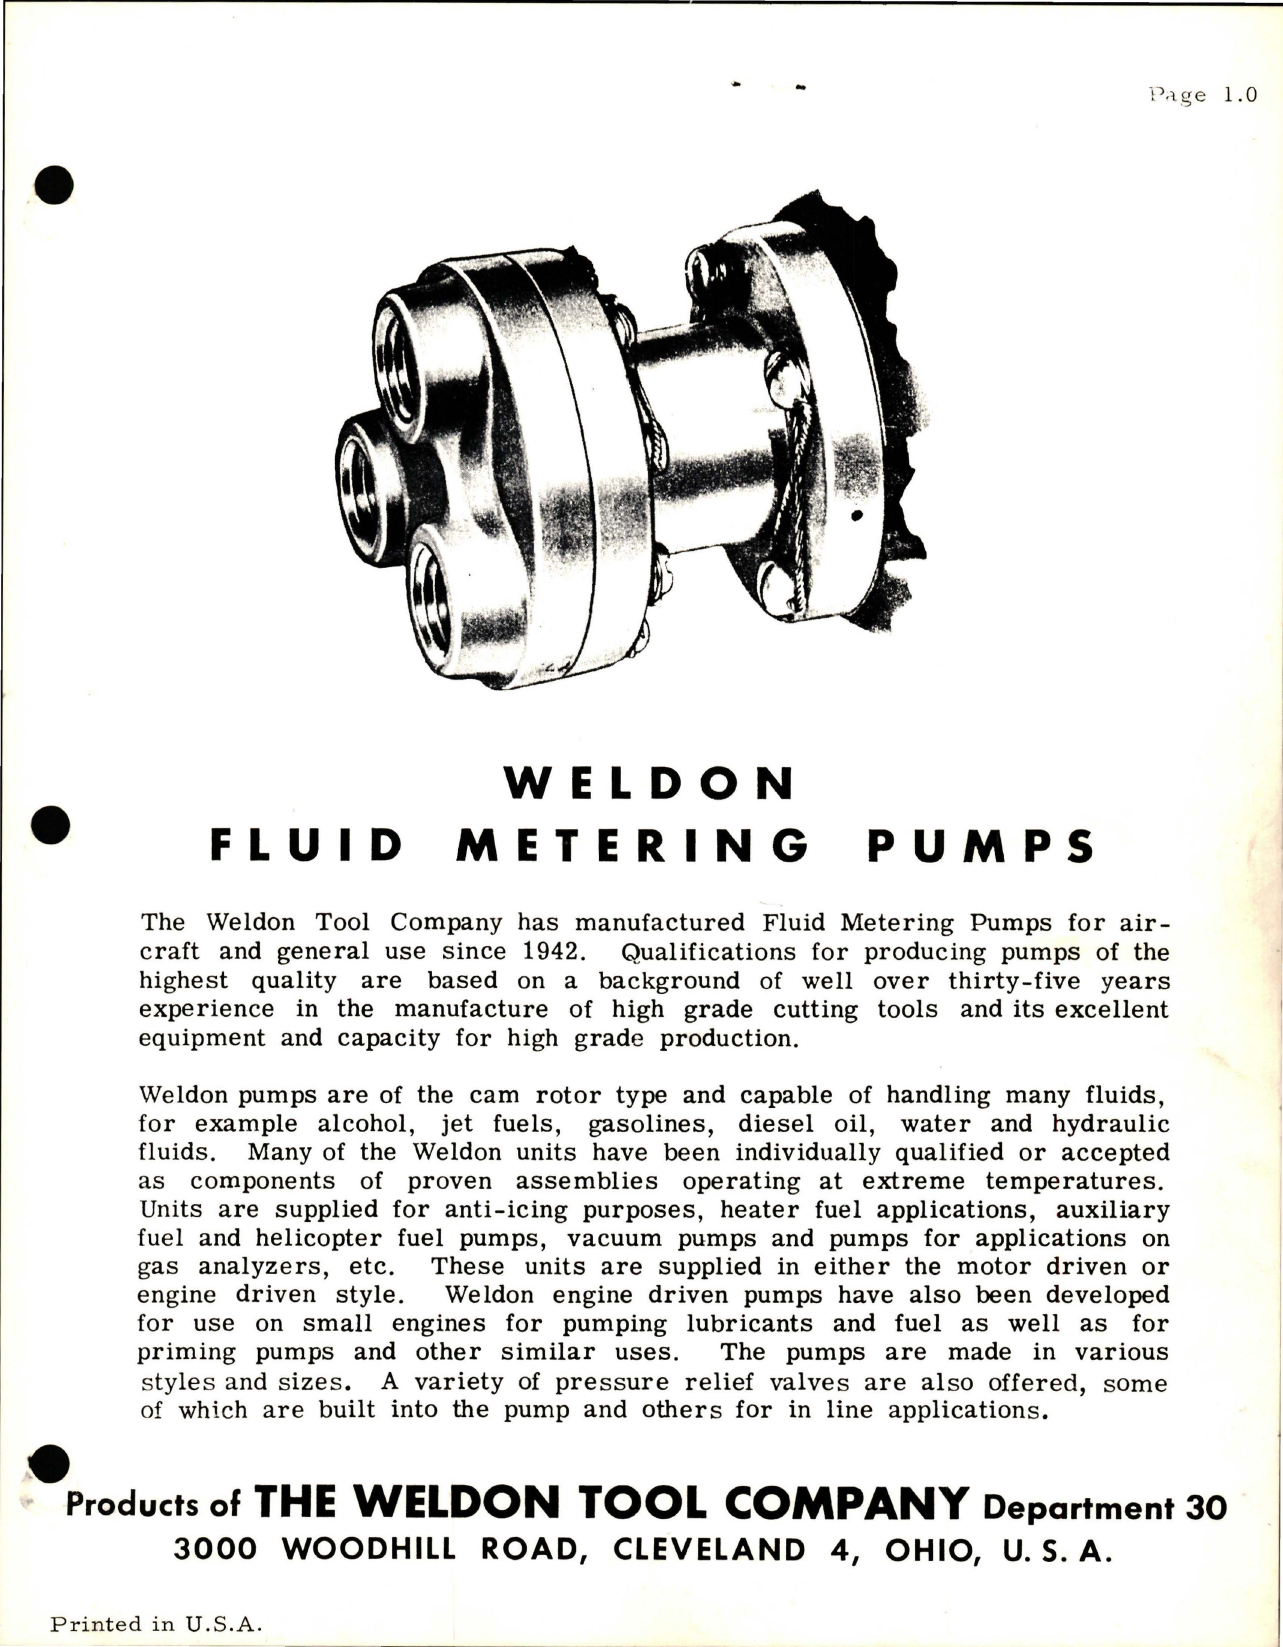 Sample page 1 from AirCorps Library document: Service Information with Test Procedures and Parts List for Fluid Metering Pumps